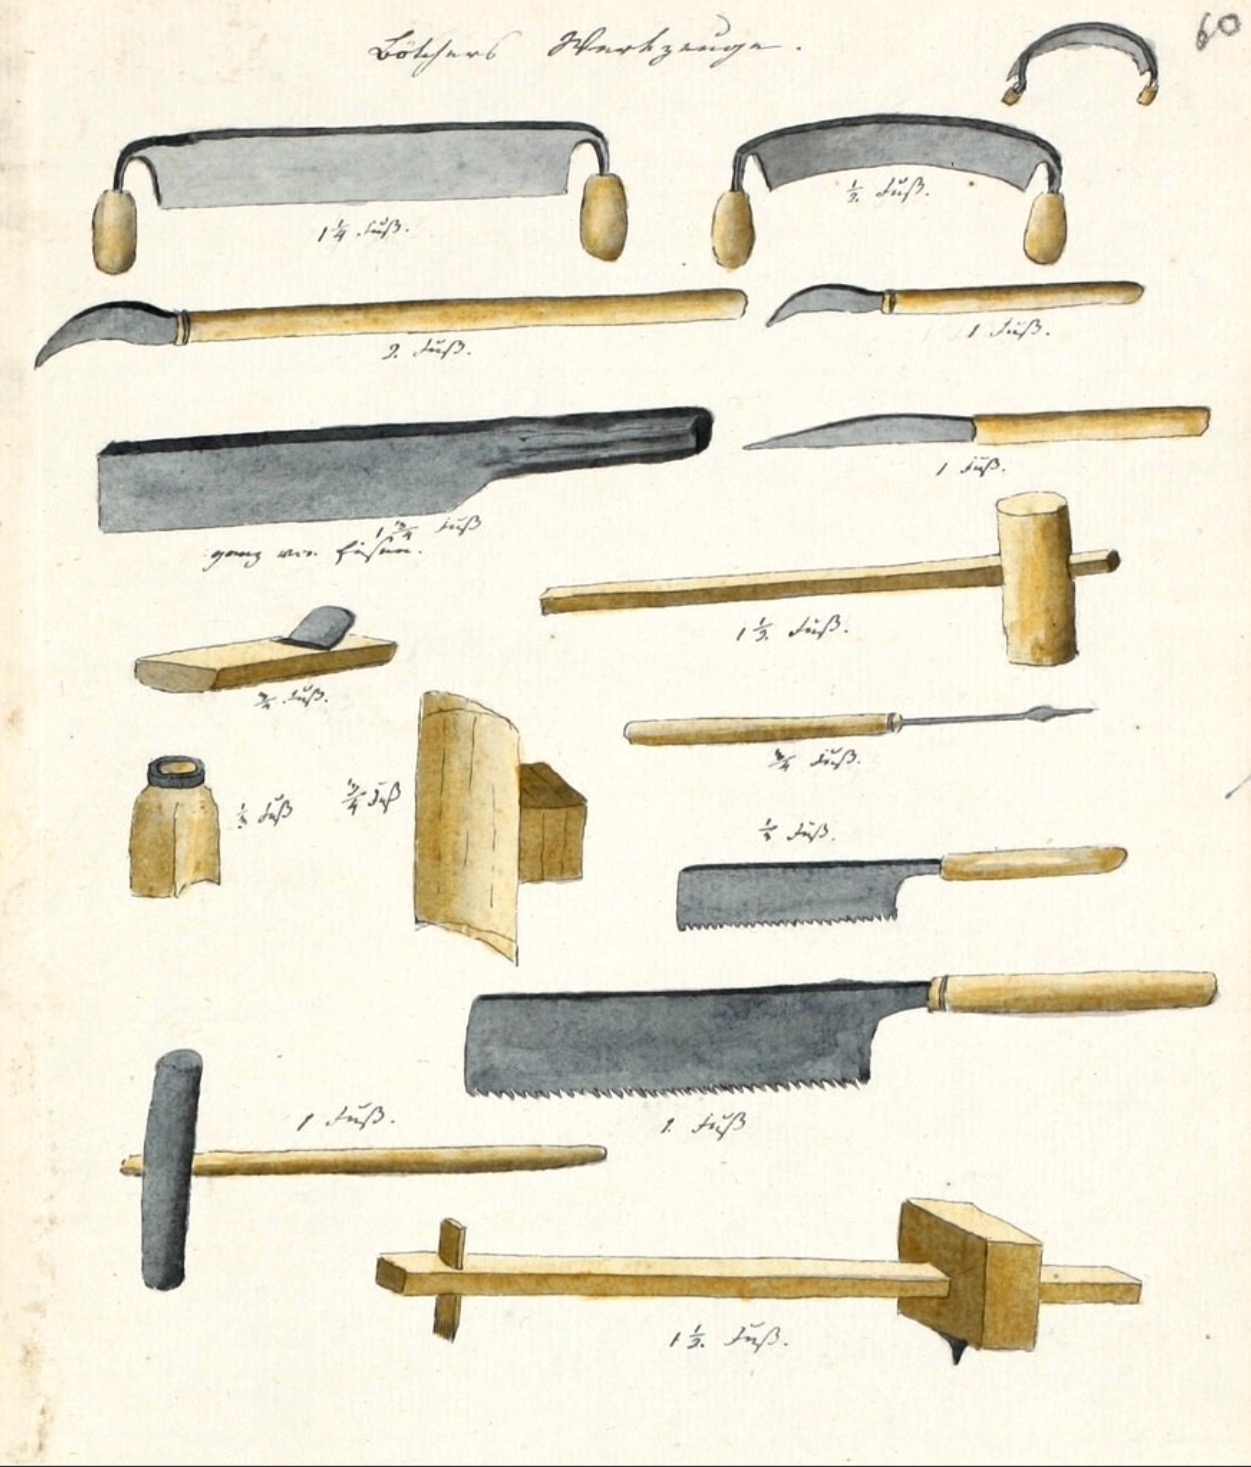 Japanese cooper's tools.